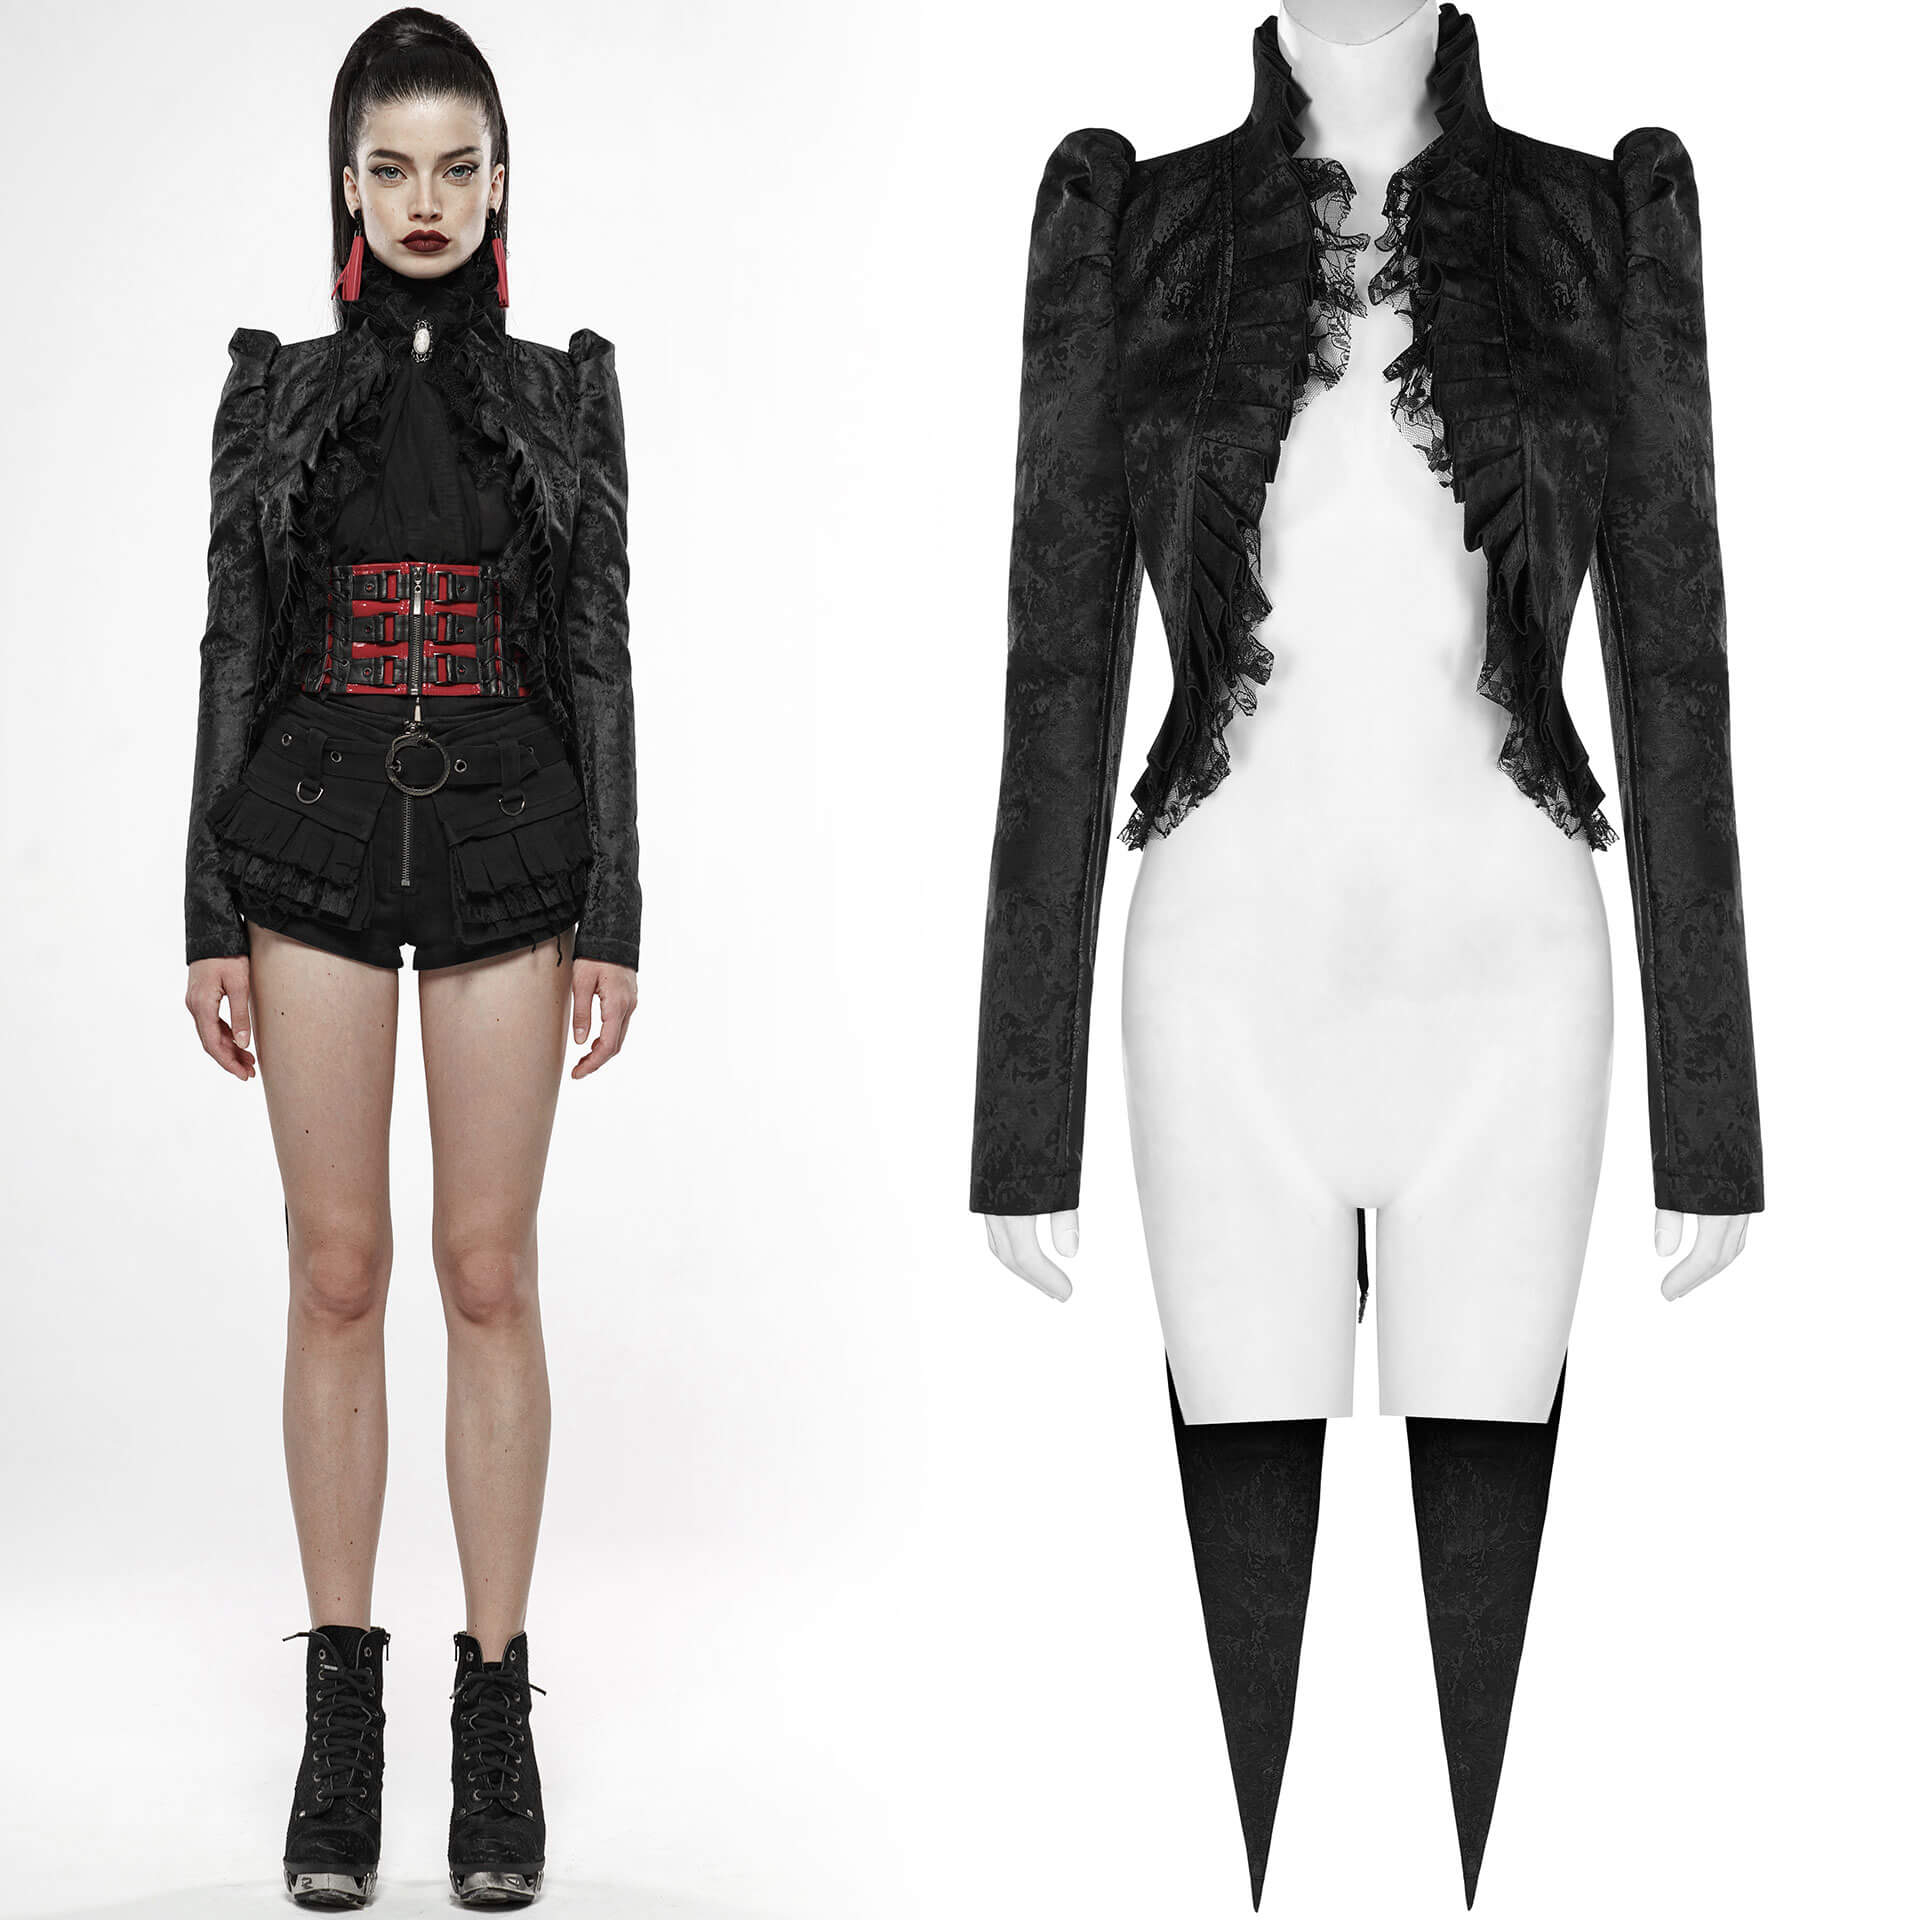 Cabaret goth styled tailcoat, choker, corset, stockings and over-the-knee  boots.